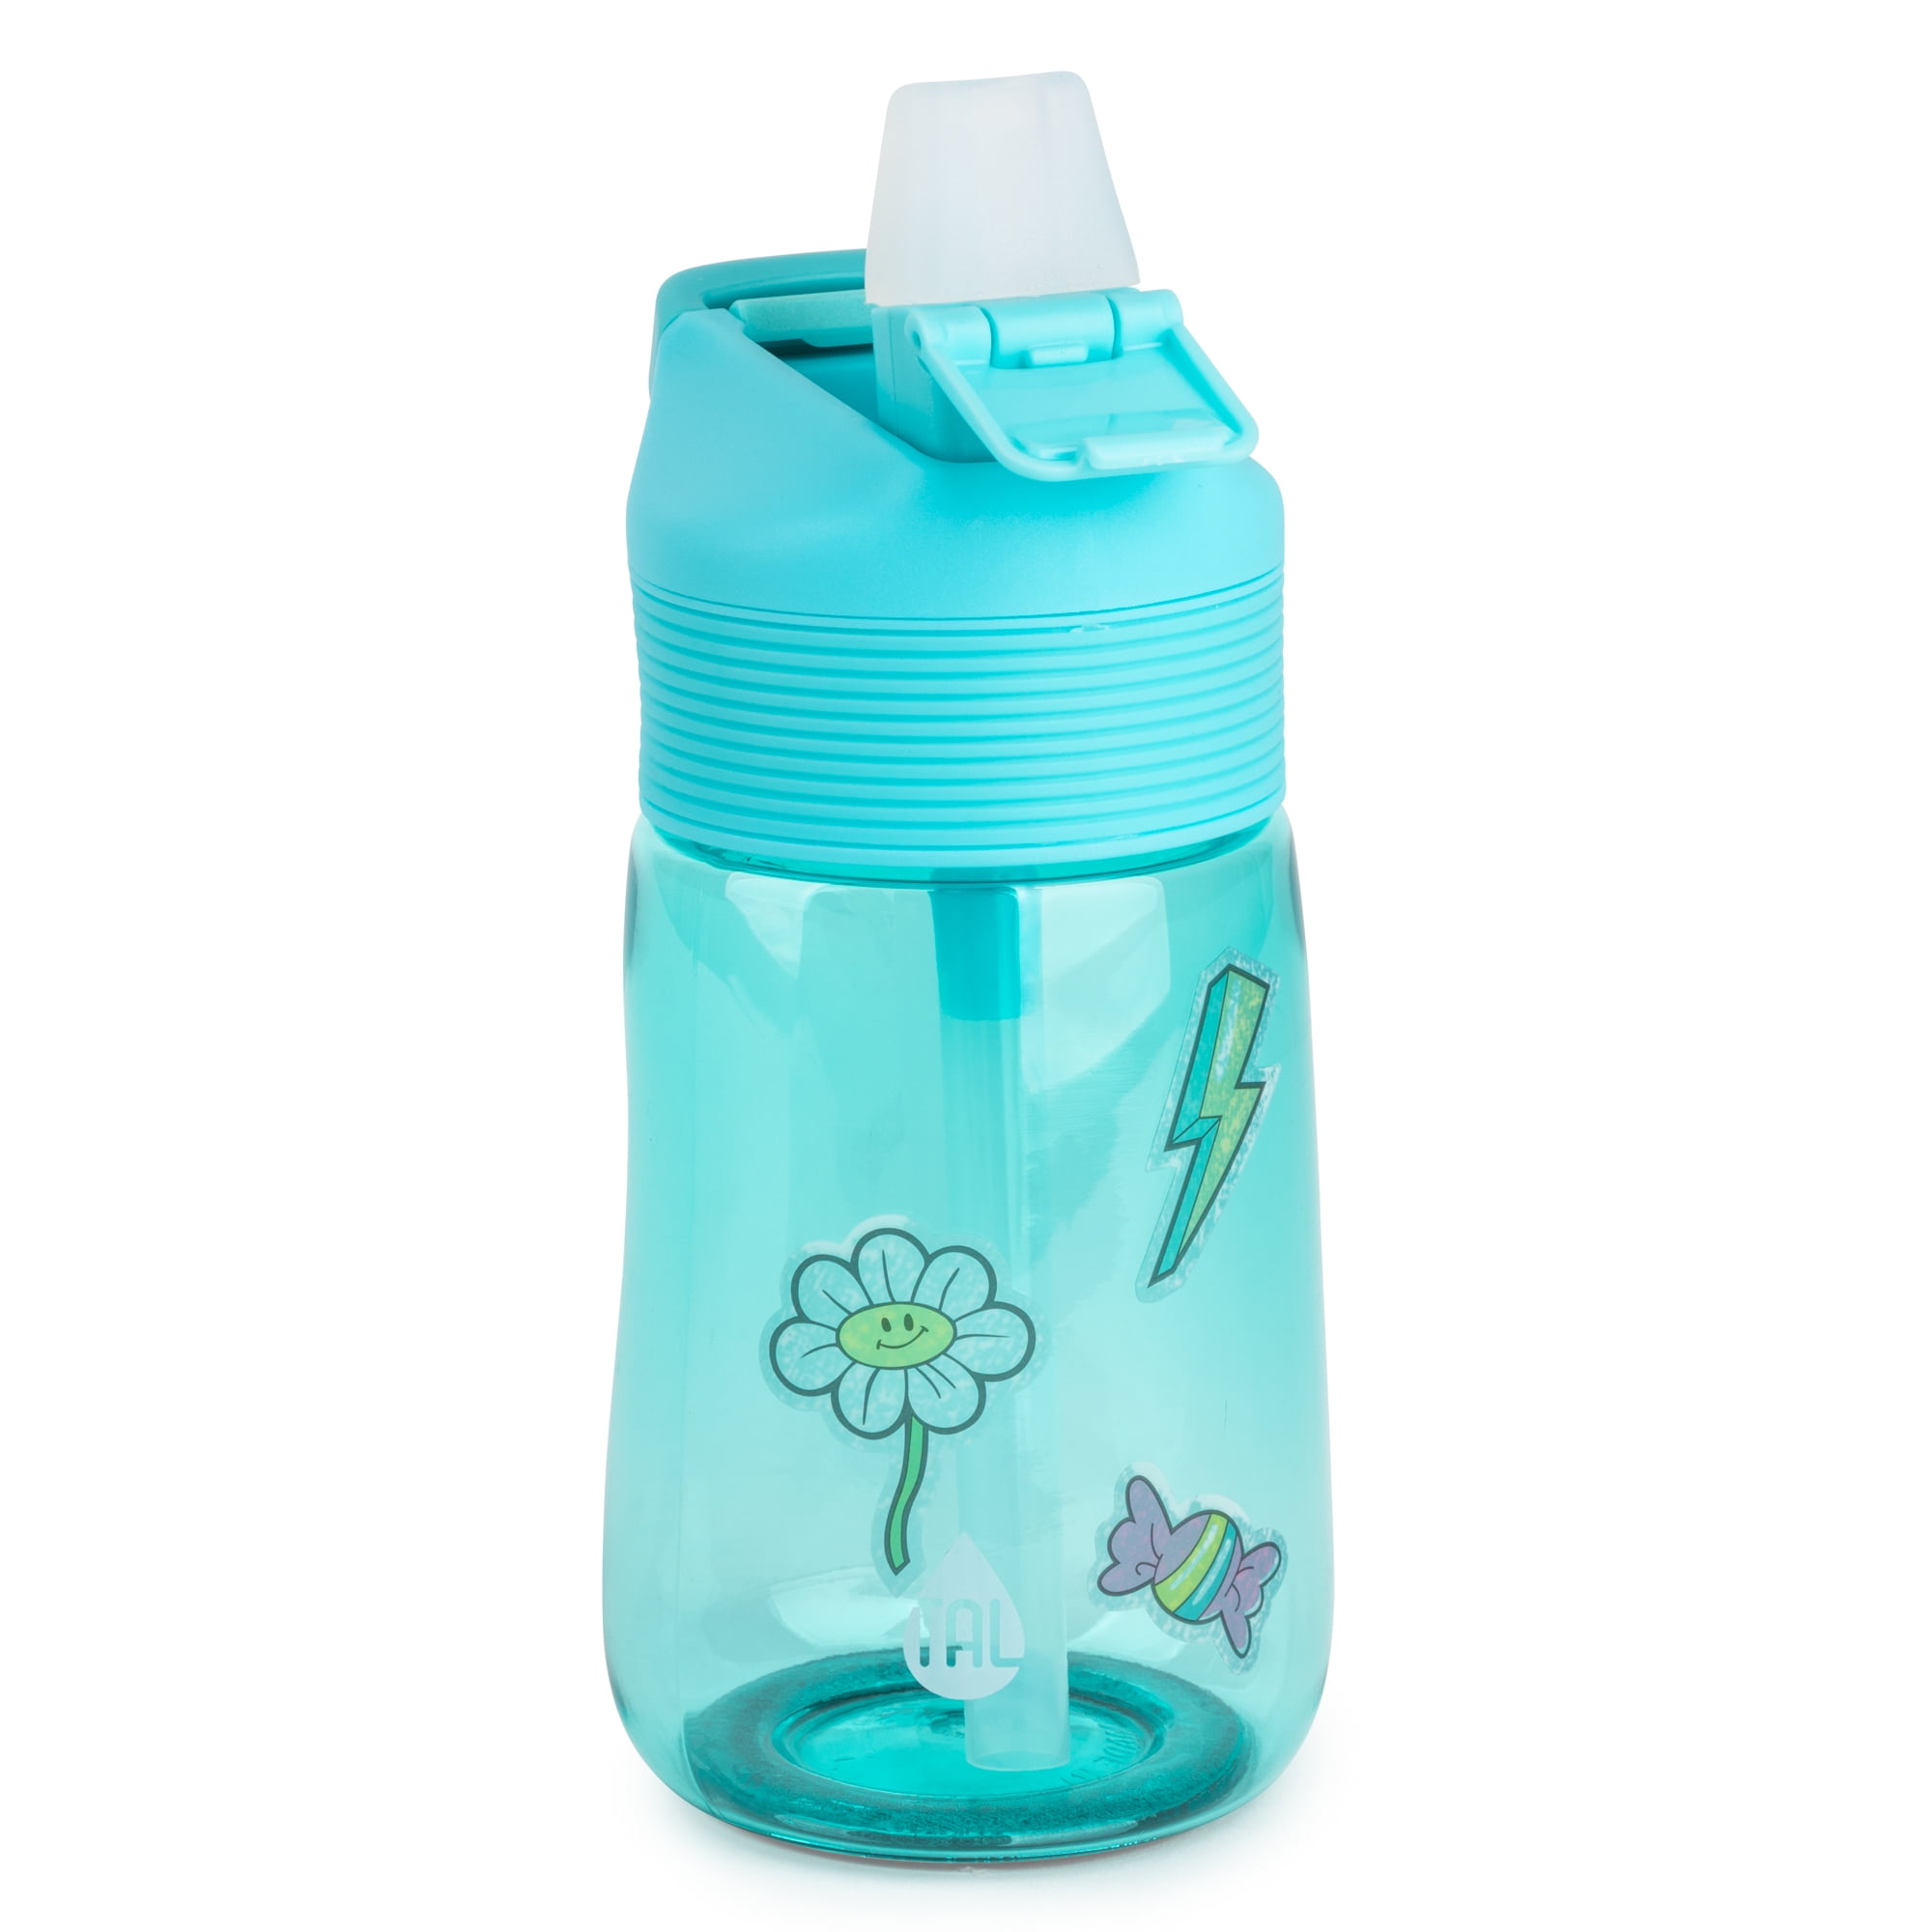 FLildon Plain Turquoise Teal Green Color Water Bottle with Straw Lid 32oz  Leakproof Clear Gym Water …See more FLildon Plain Turquoise Teal Green  Color